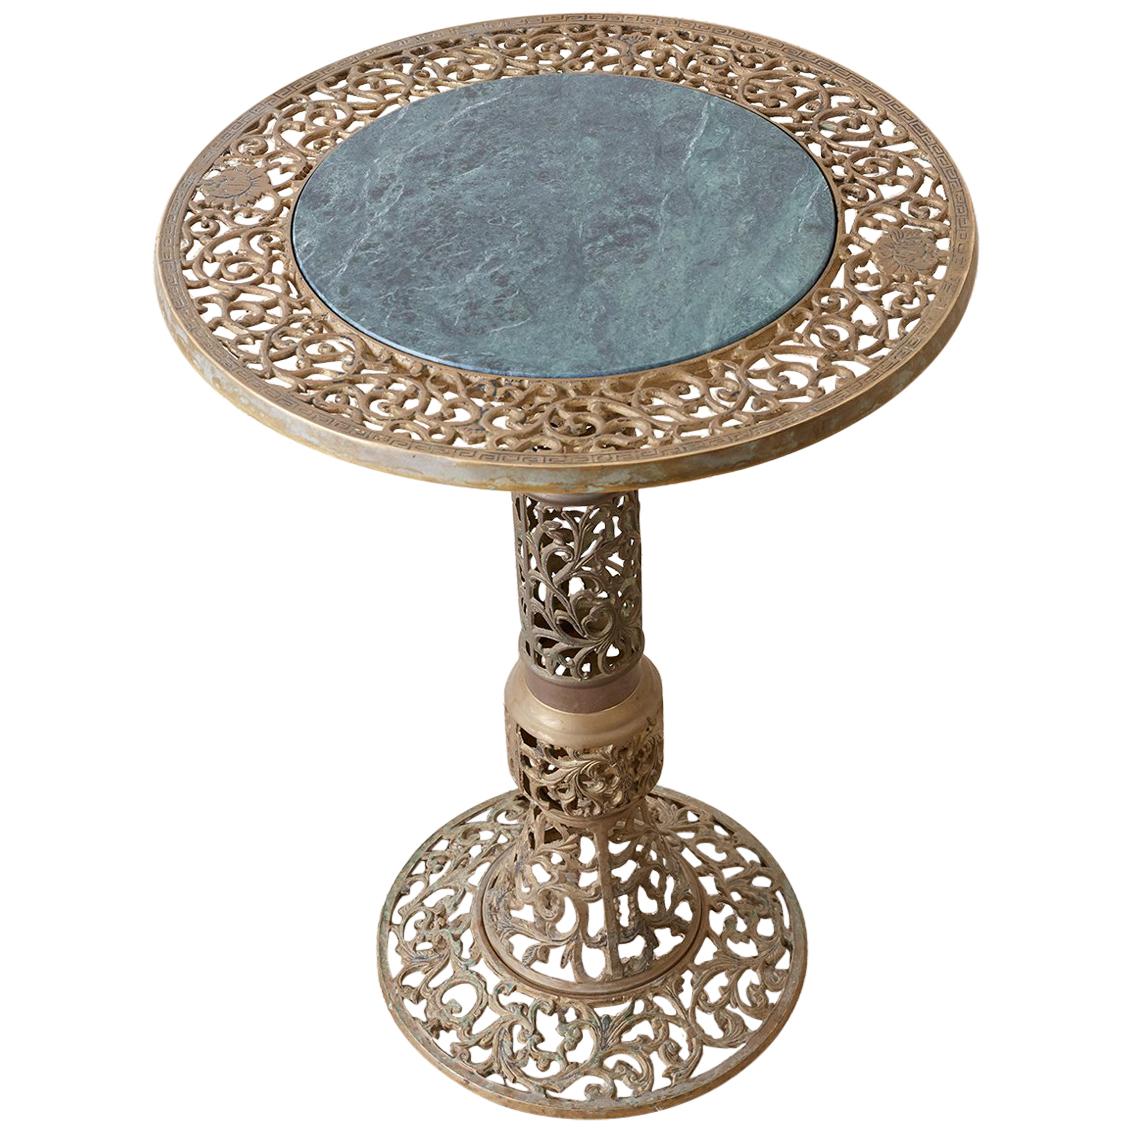 Chinese Reticulated Brass and Marble Top Drink Table